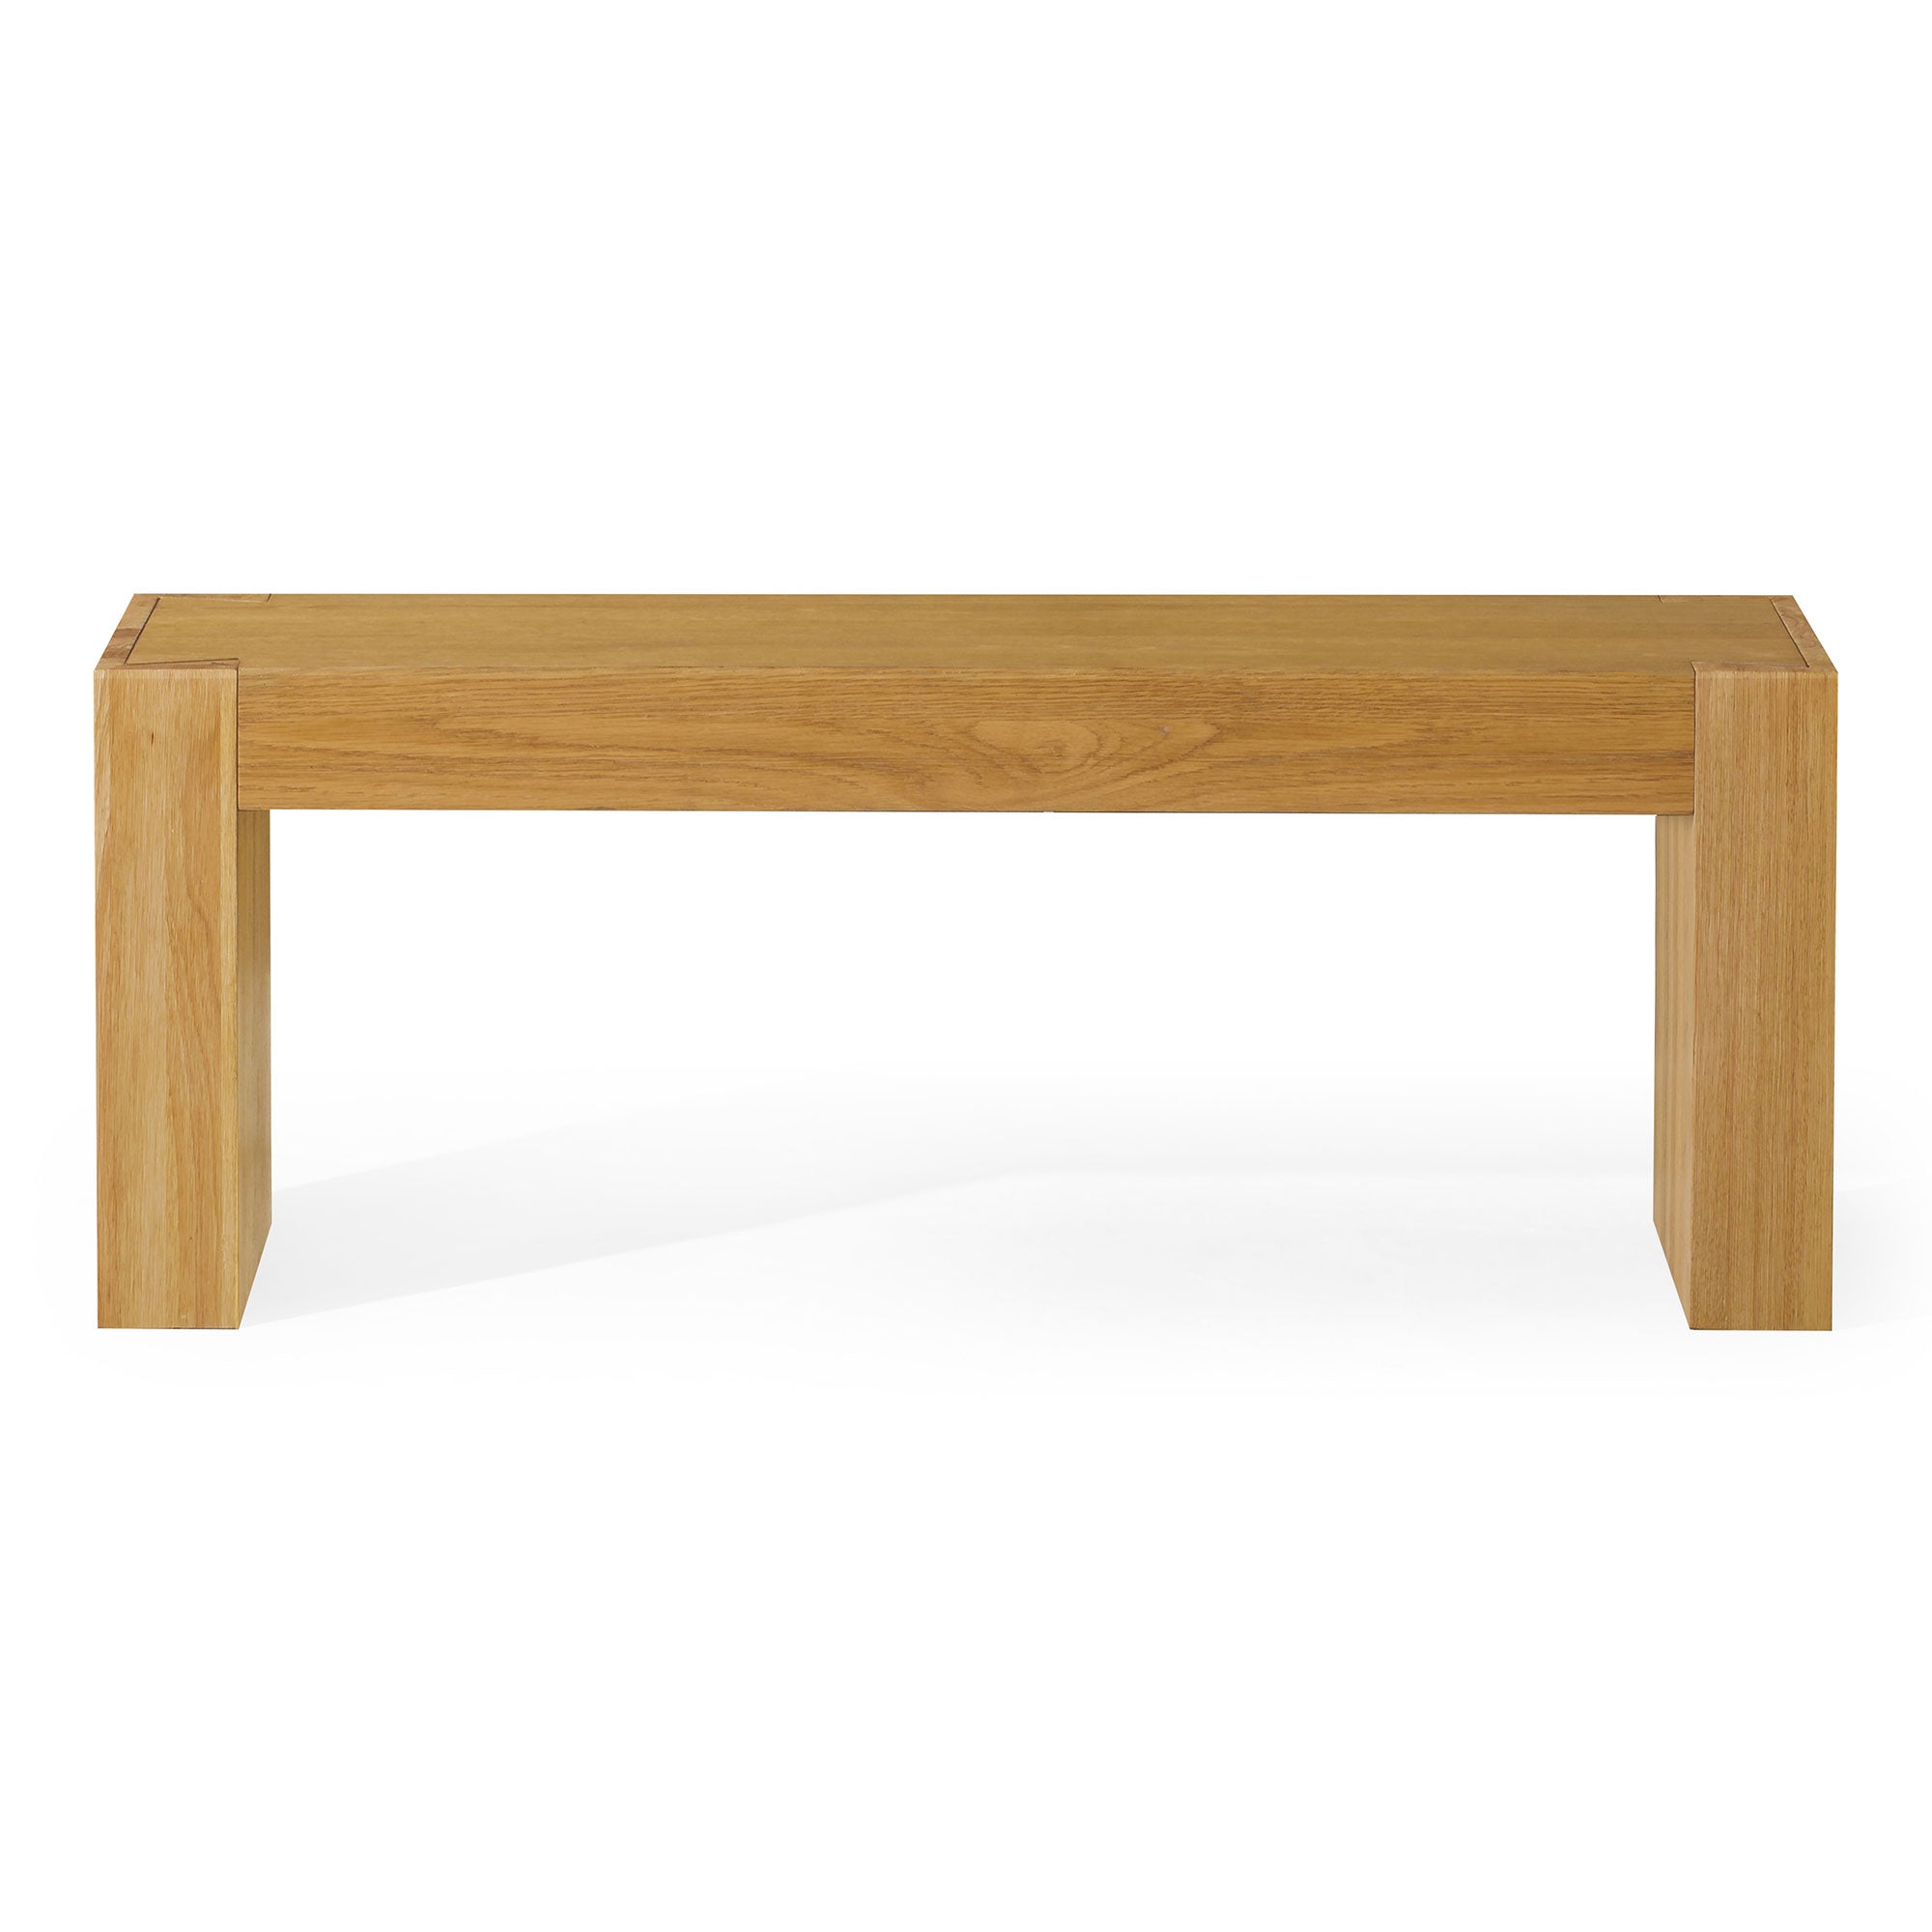 Zeno Organic Wooden Bench in Weathered Natural Finish in Ottomans & Benches by Maven Lane